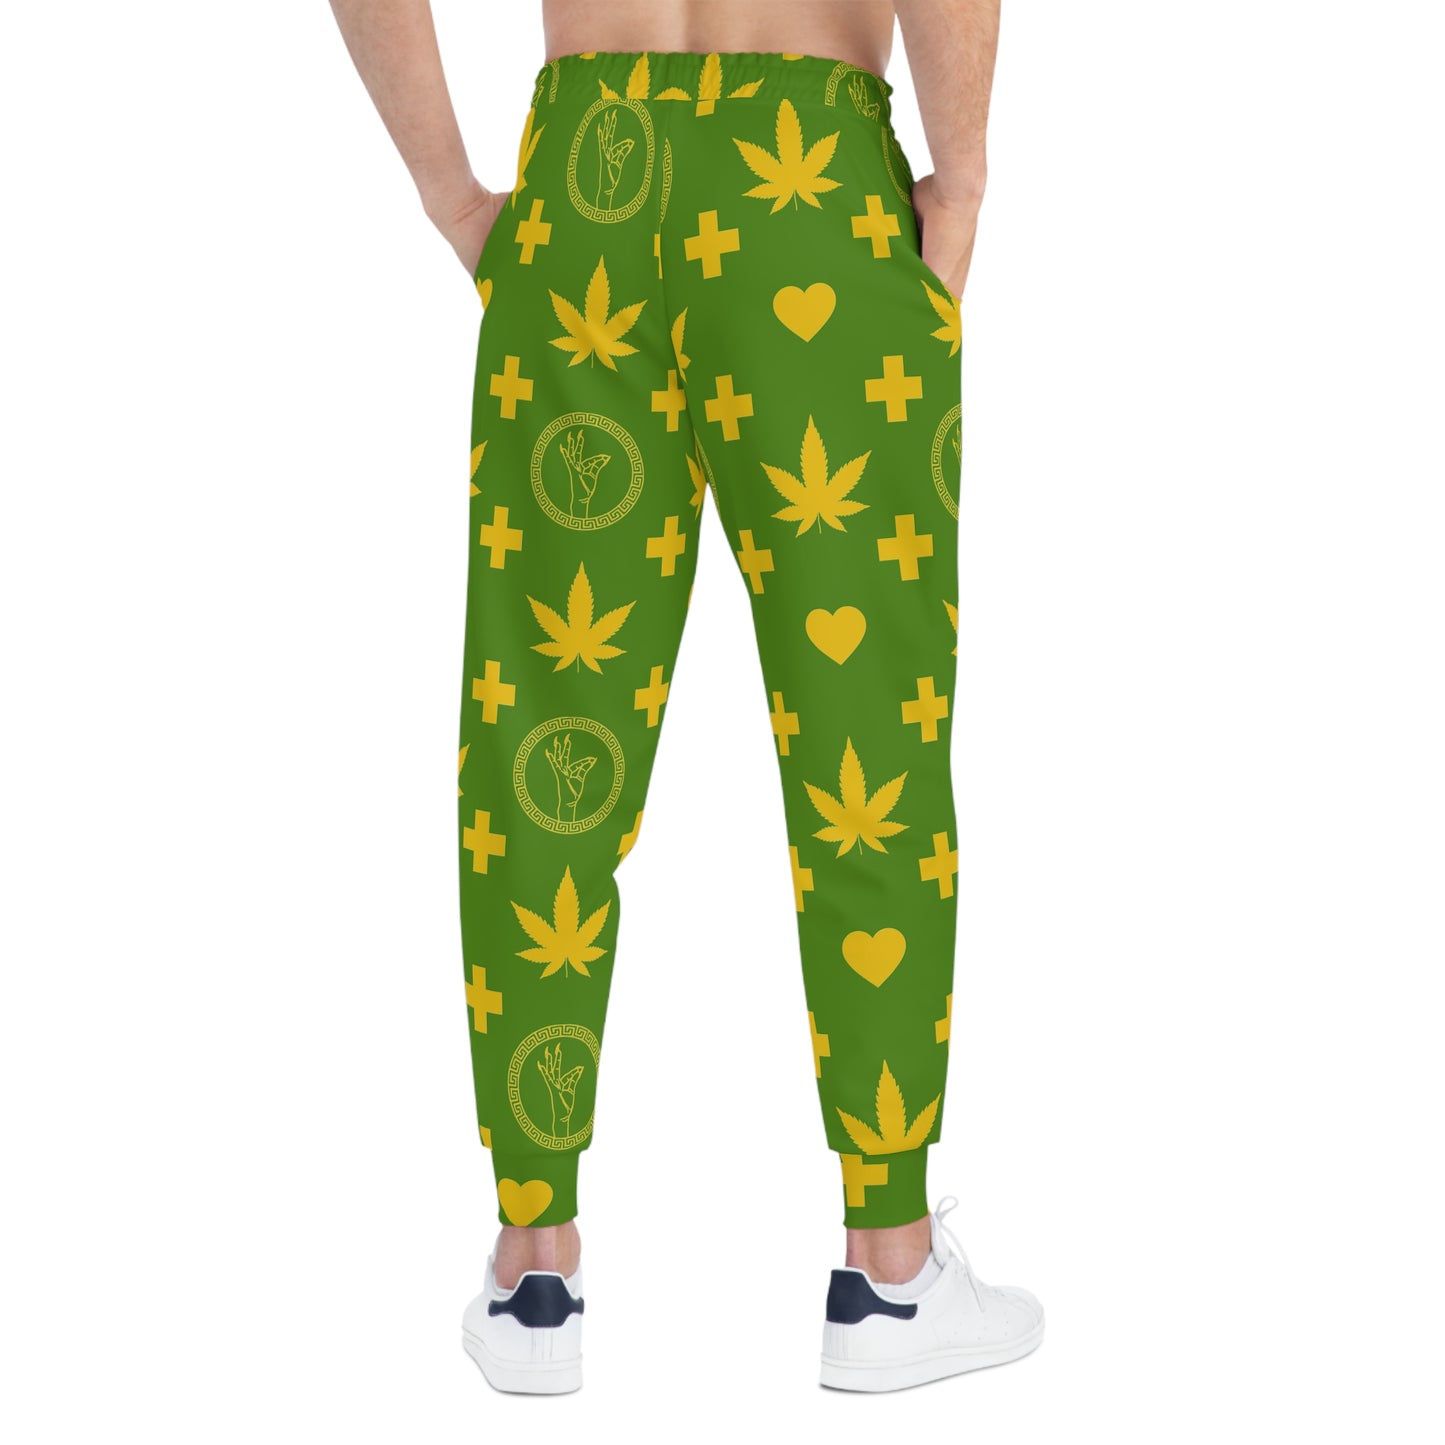 "Medallion Herb Couture” Joggers